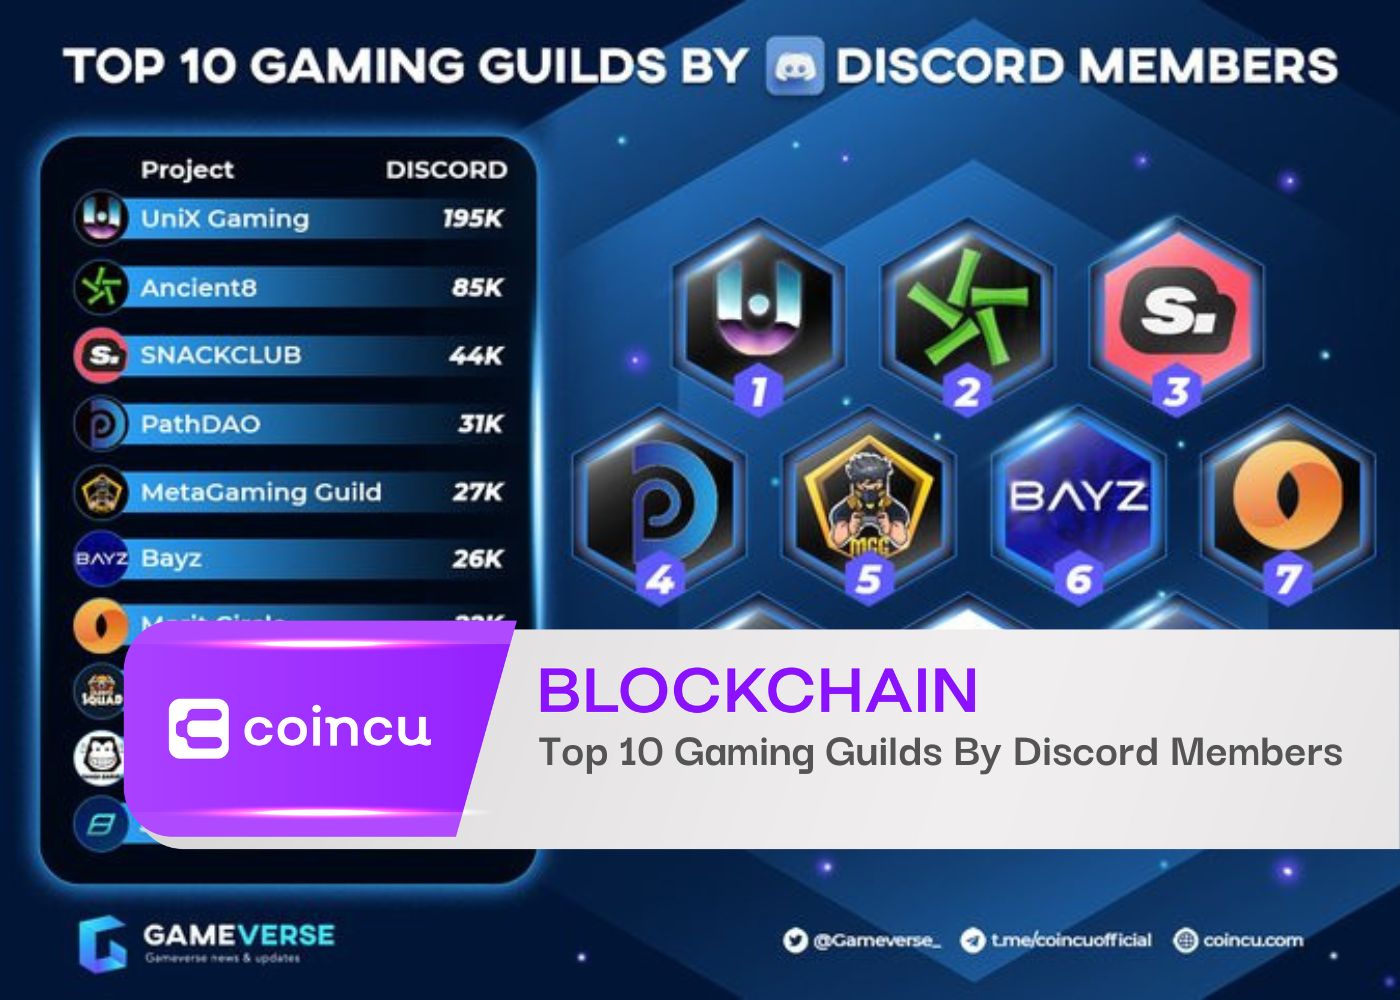 Top 10 Gaming Guilds By Discord Members